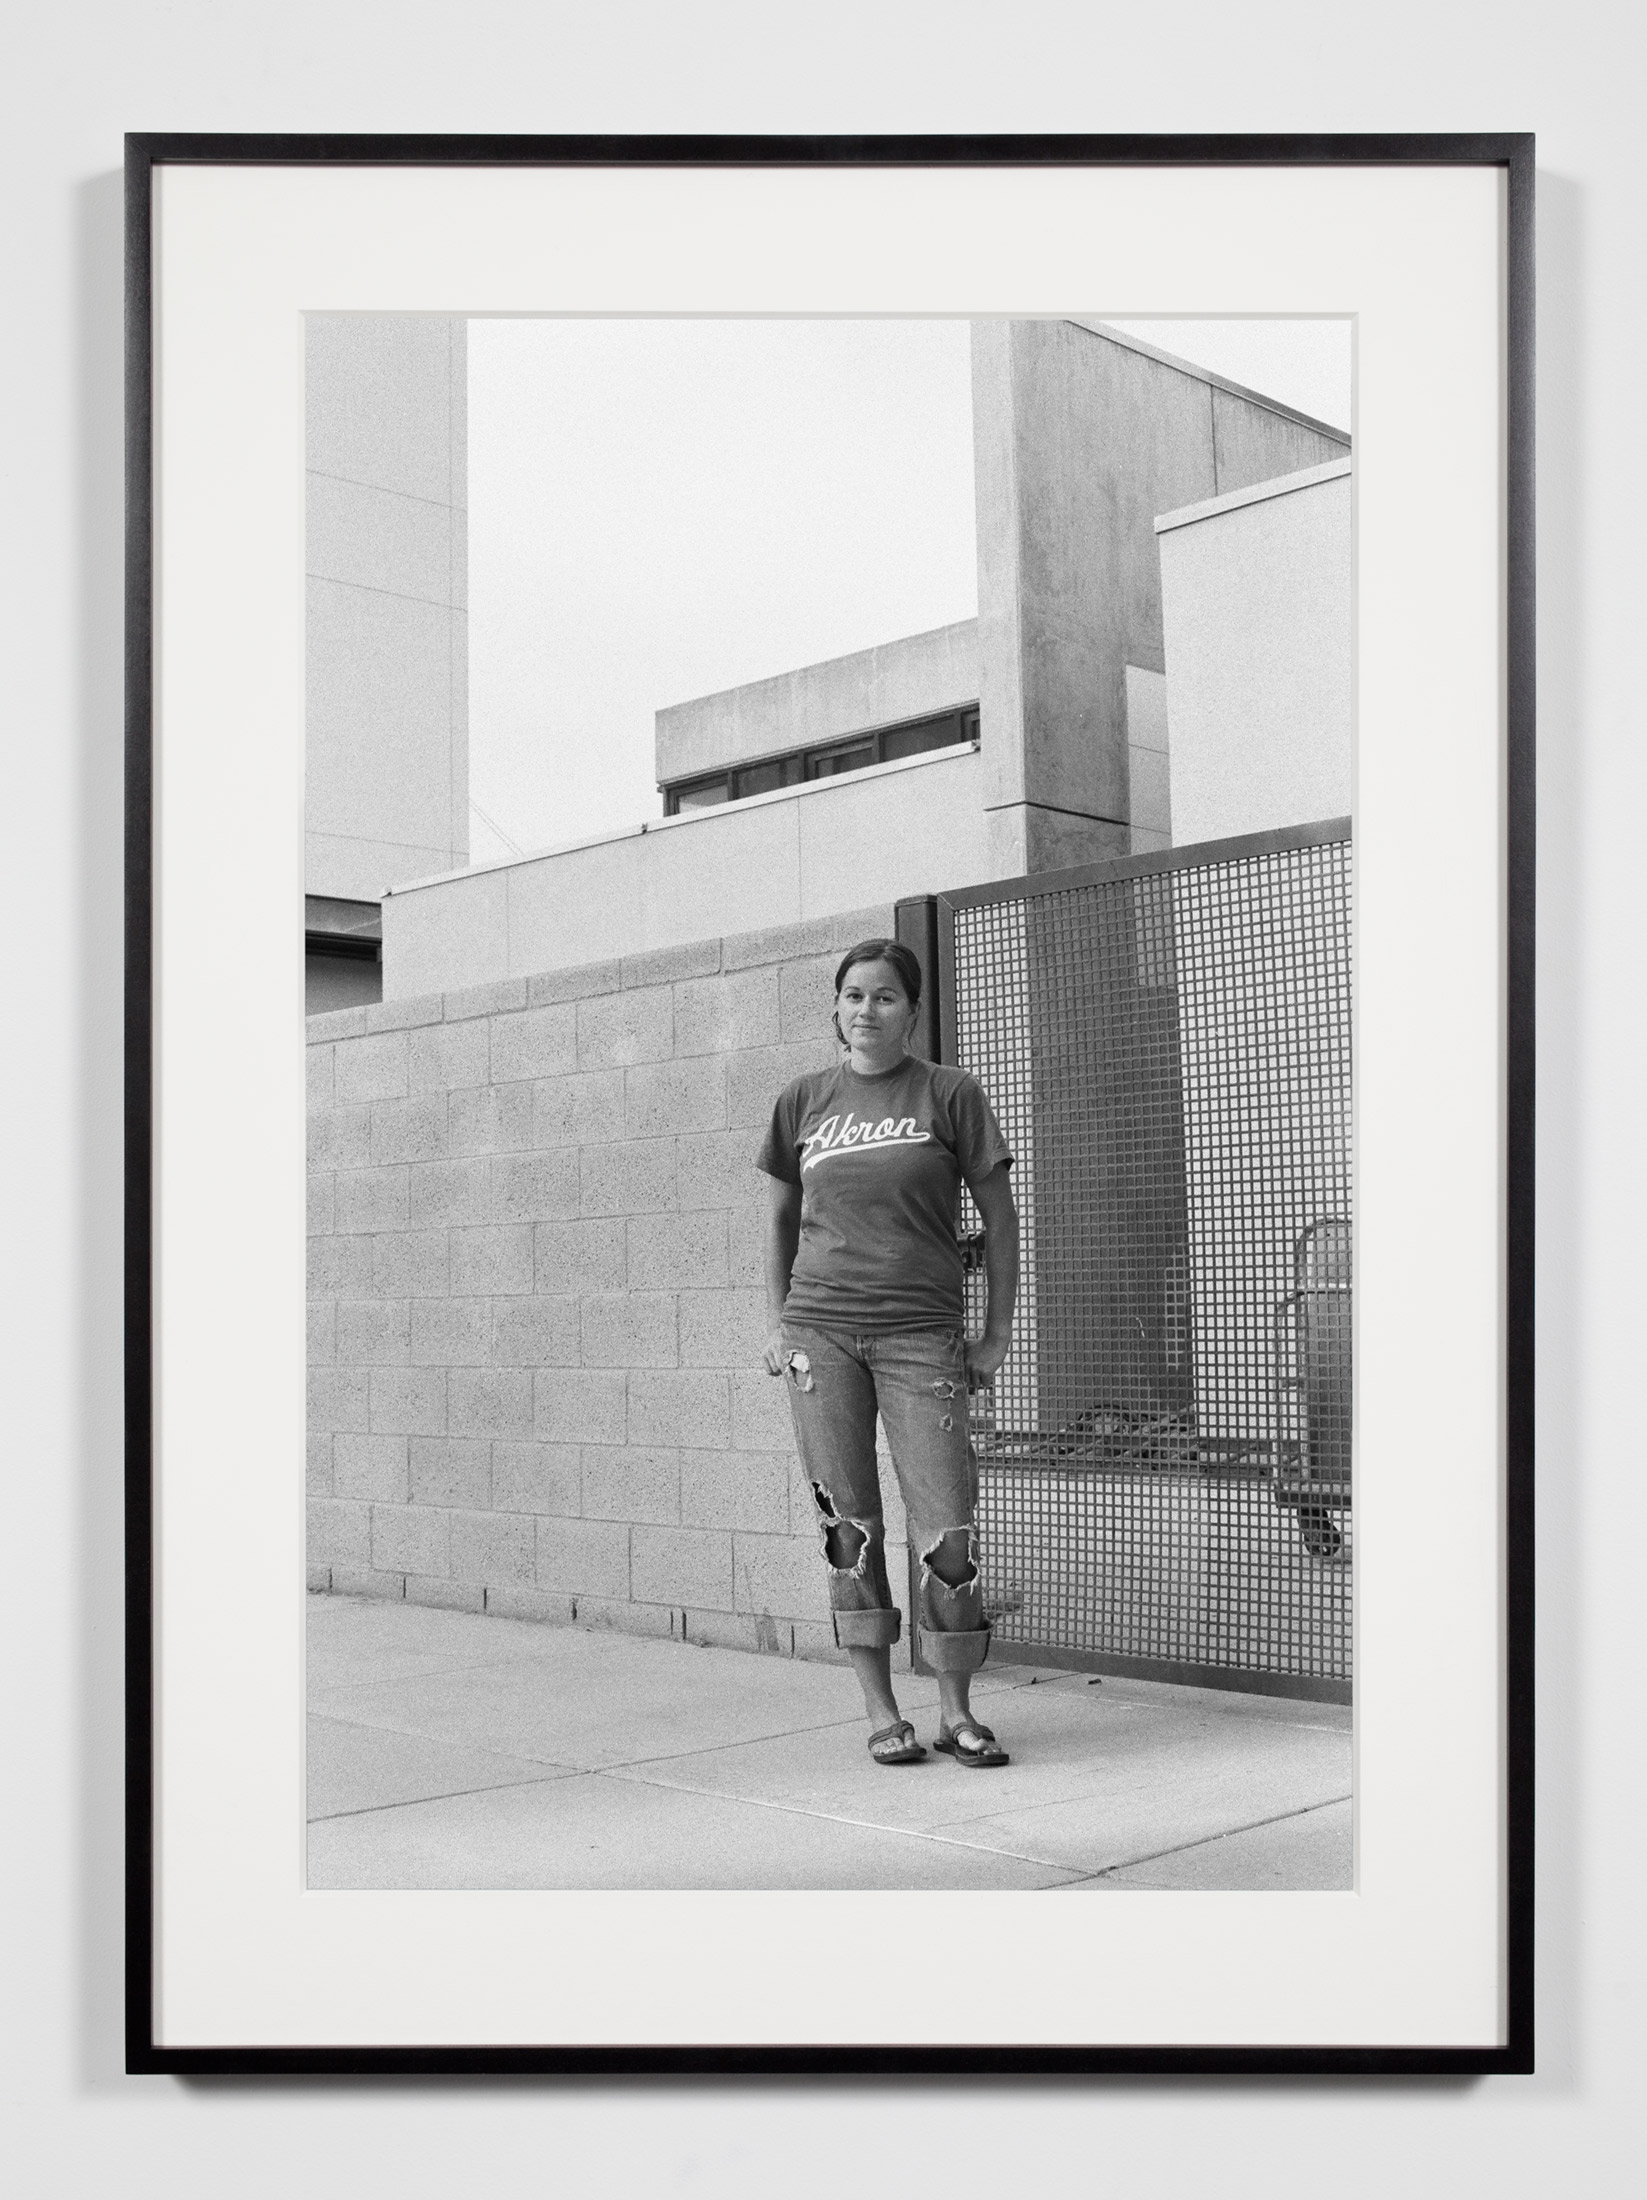   Darkroom Assistant, Irvine, California, September 14, 2009    2011   Epson Ultrachrome K3 archival ink jet print on Hahnemühle Photo Rag paper  36 3/8 x 26 3/8 inches   Industrial Portraits, 2008–     